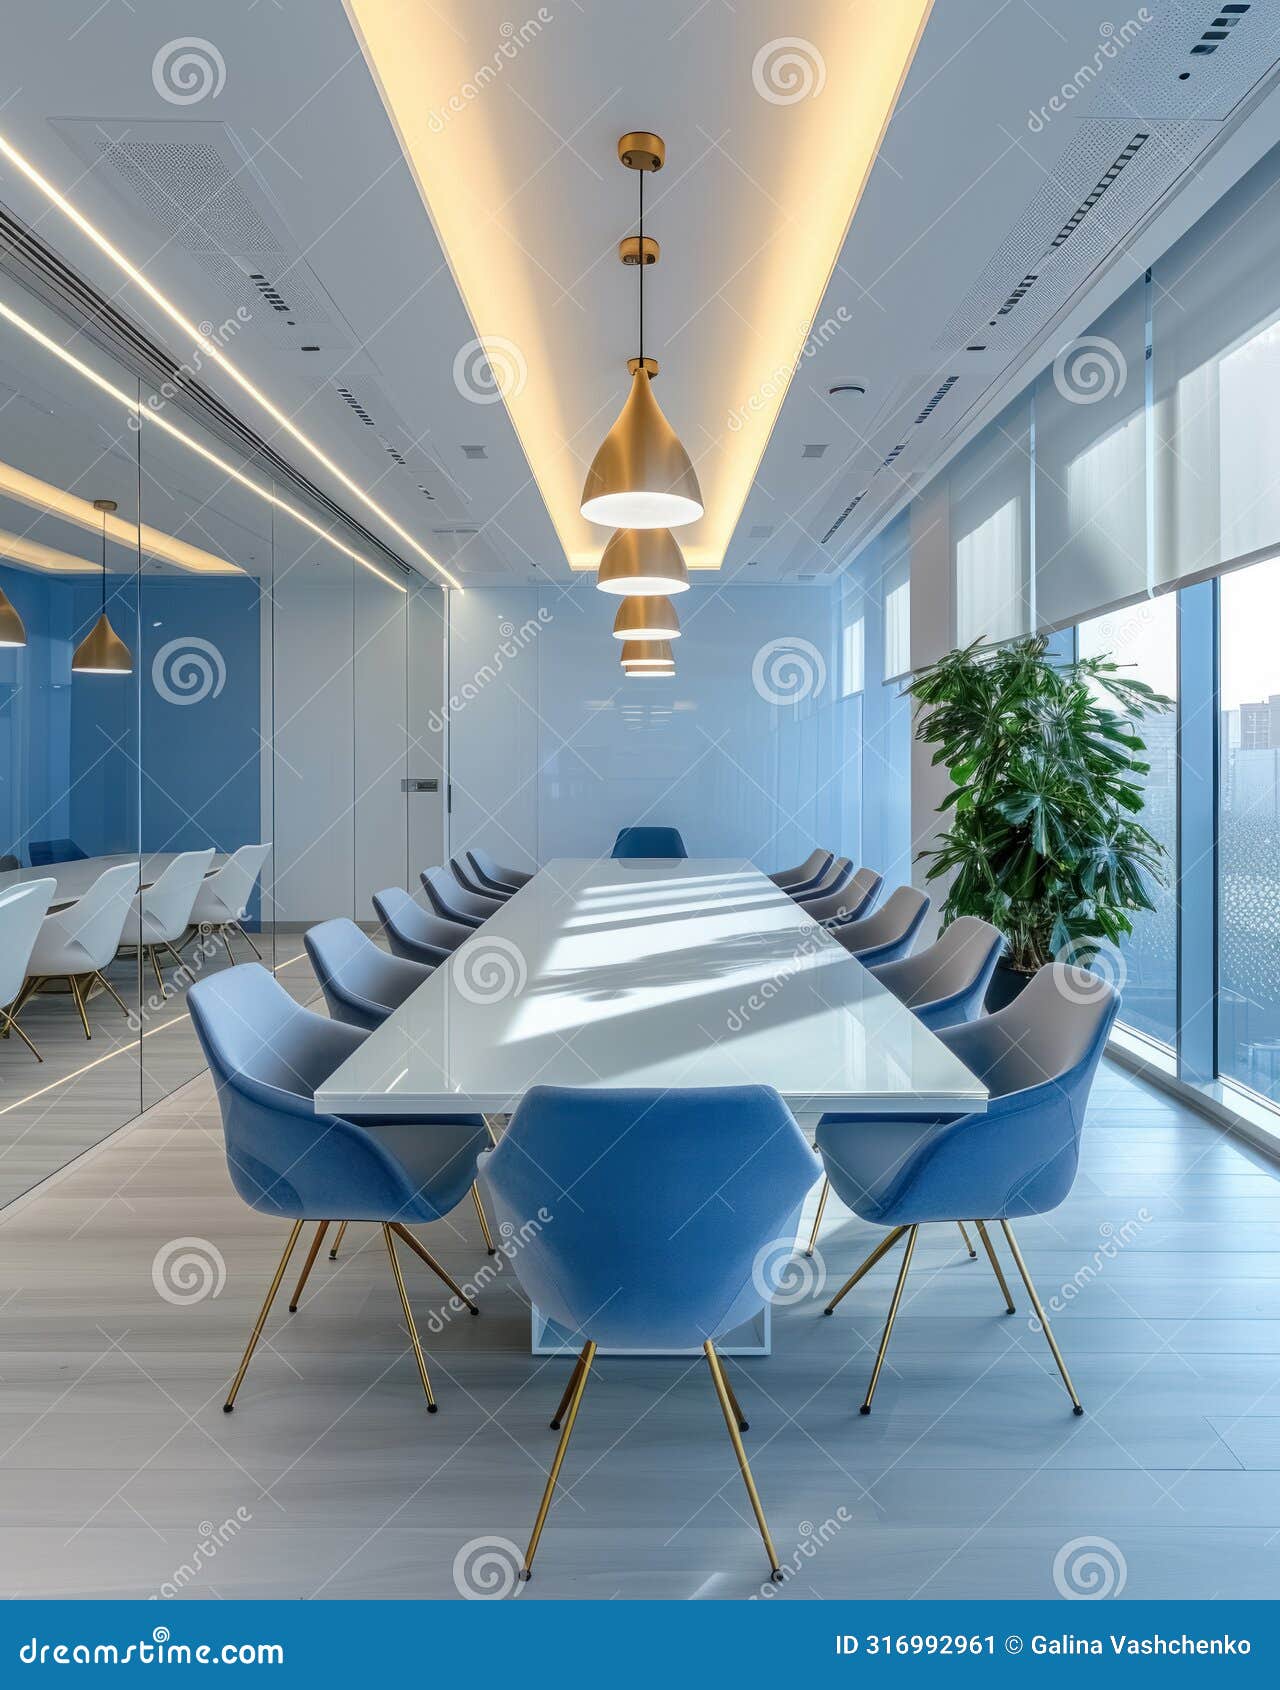 empty modern meeting room with long white table, blue chairs and glass partitions in bright office